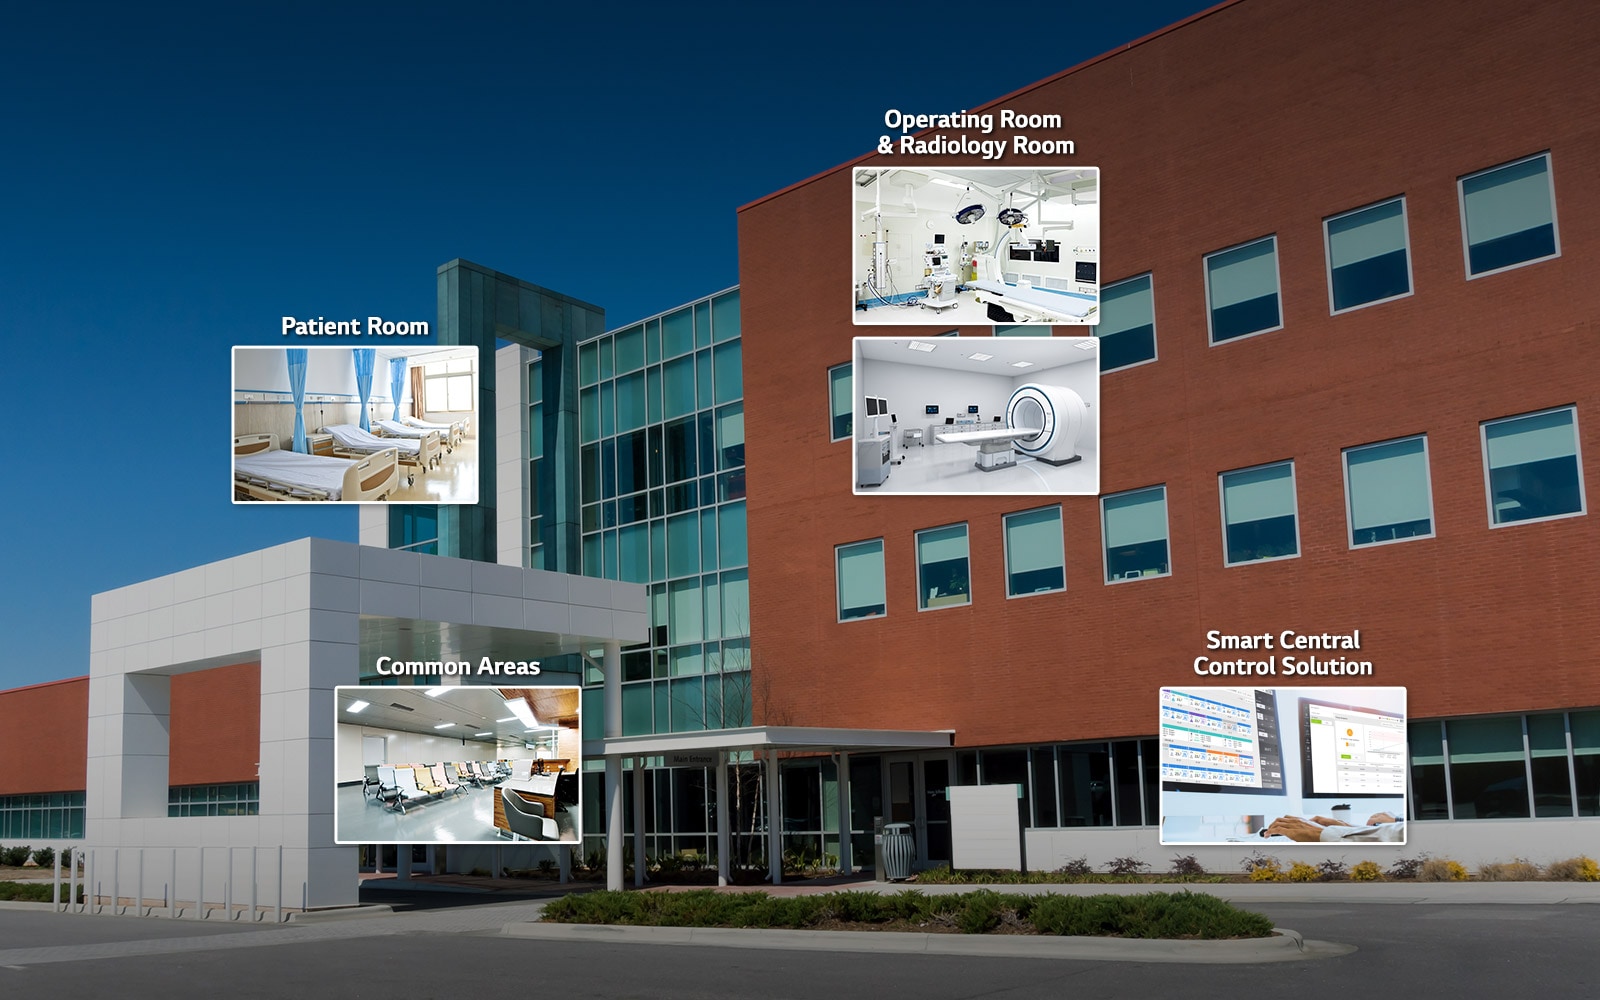 An image of a hospital with thumbnails of a patient room, common areas, an operating room, a radiology room, and a control center.